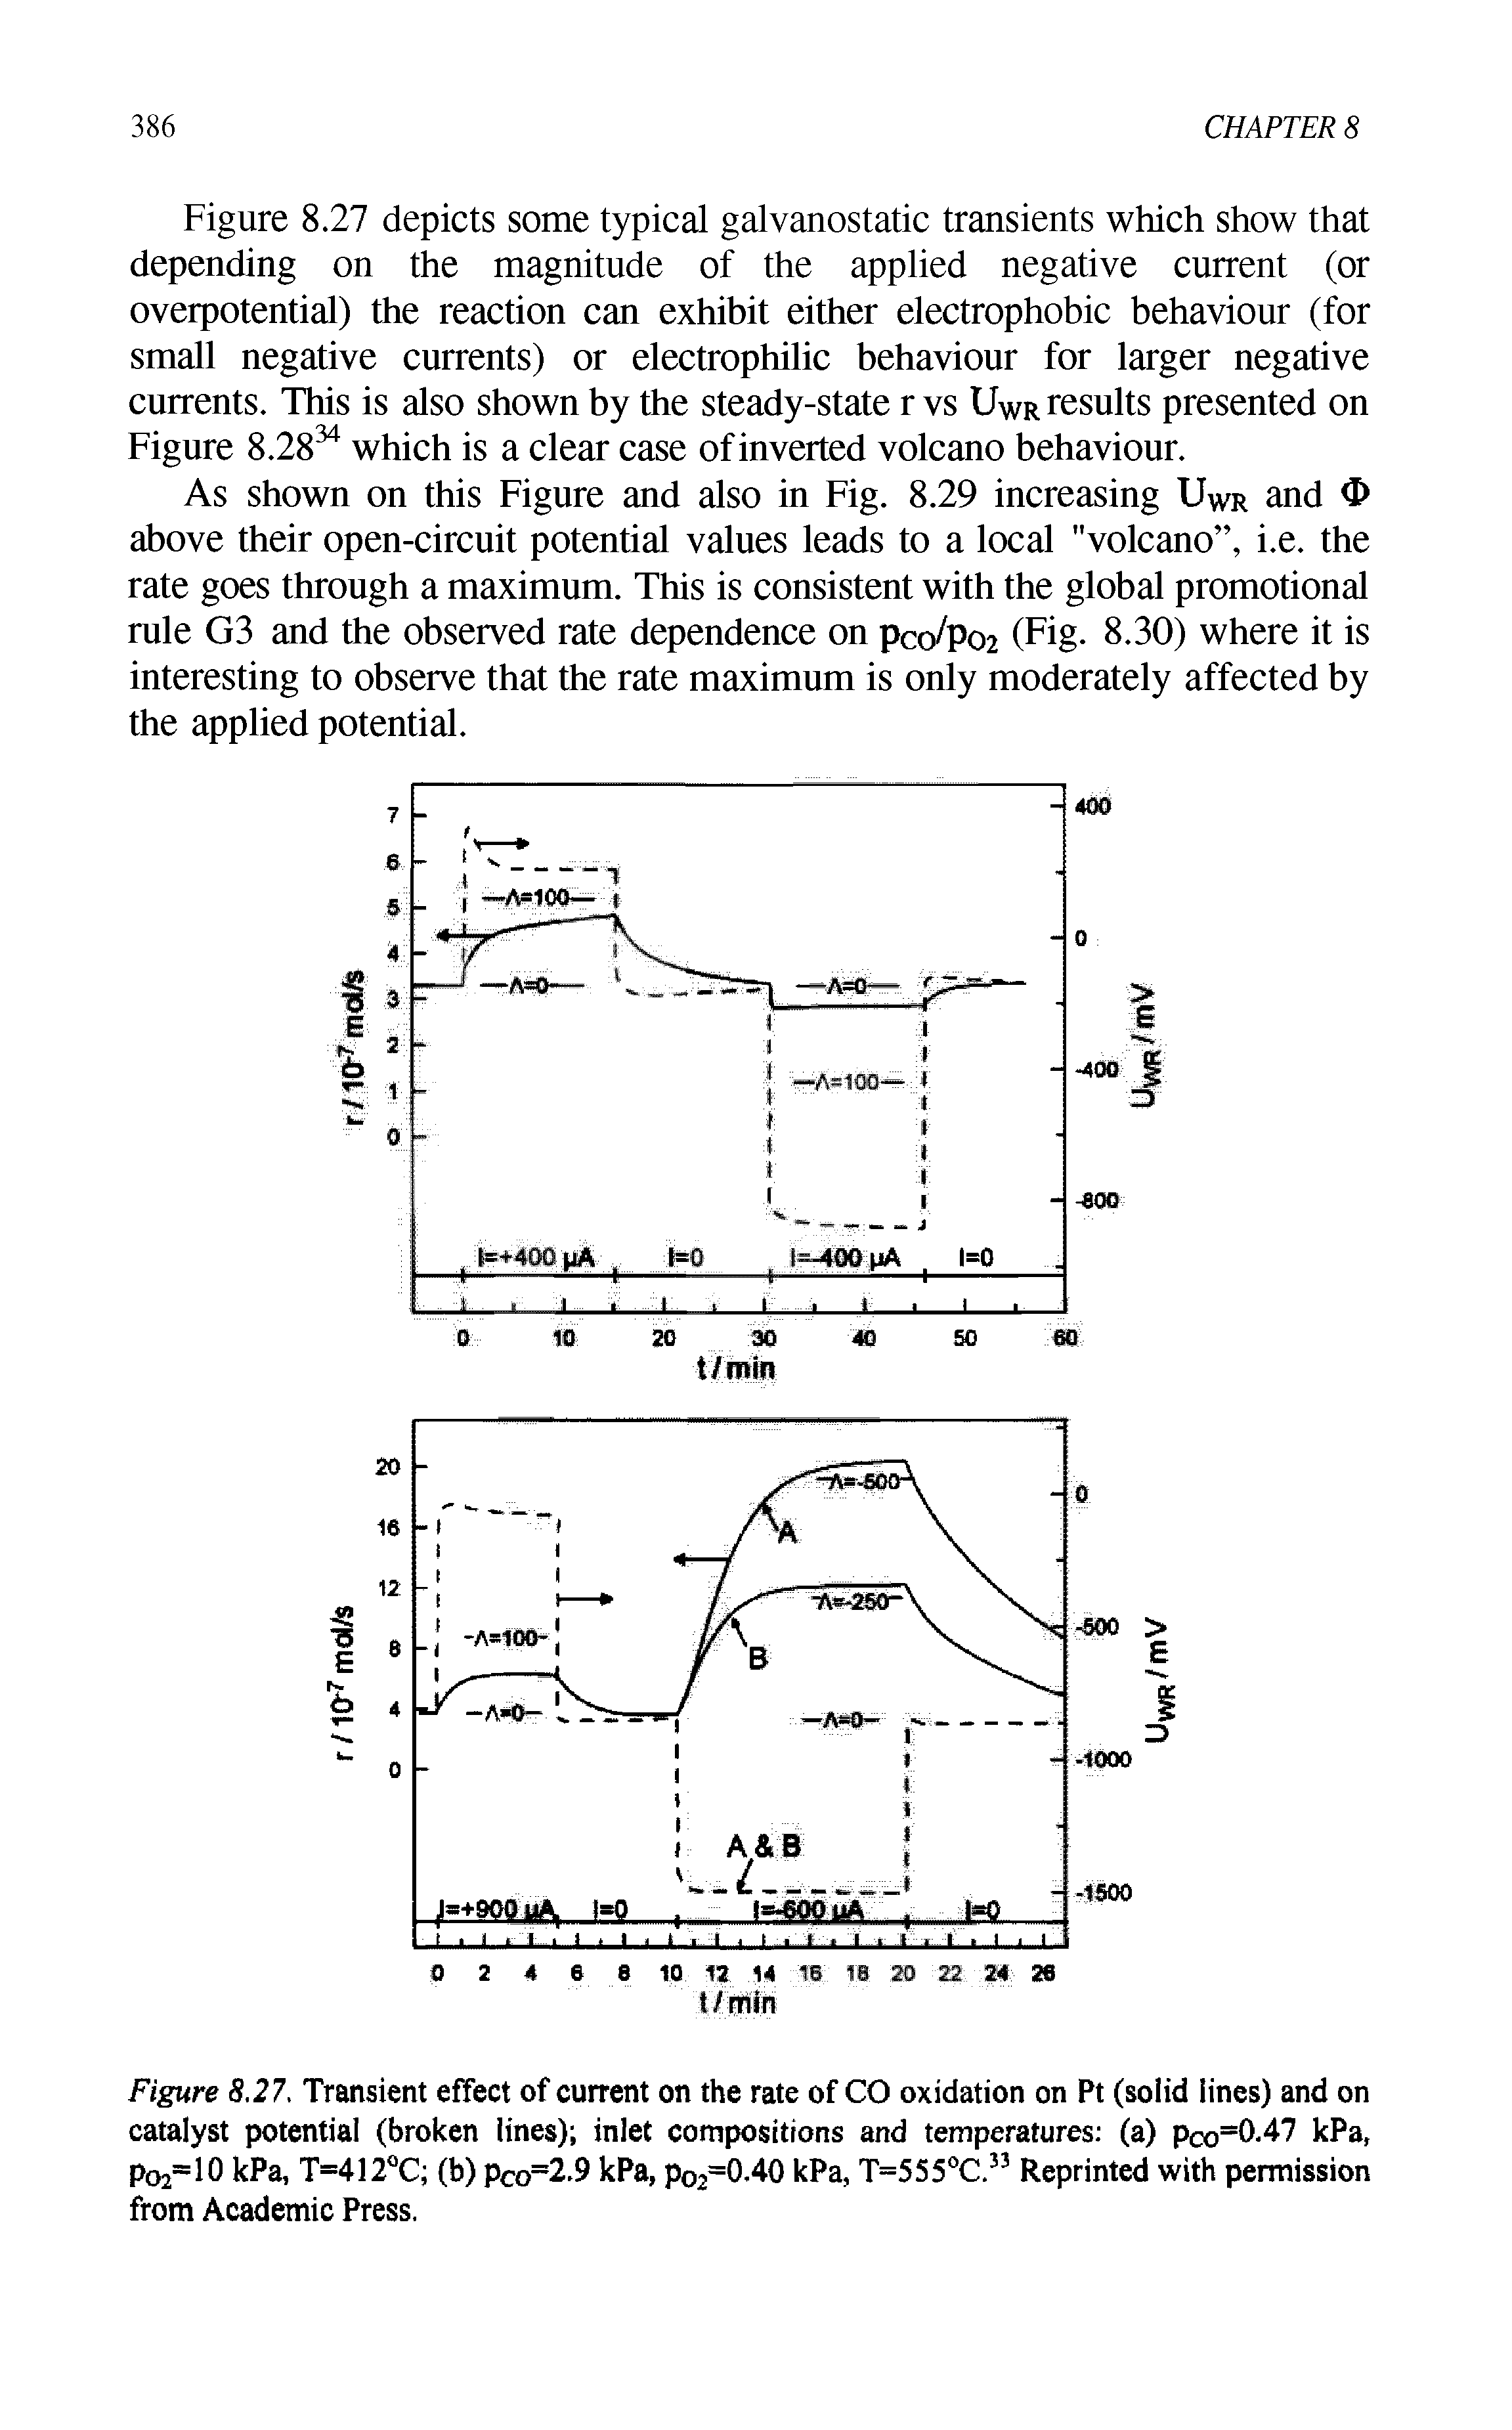 Figure 8.27. Transient effect of current on the rate of CO oxidation on Pt (solid lines) and on catalyst potential (broken lines) inlet compositions and temperatures (a) pco=0.47 kPa, po2-10 kPa, T=412°C (b) pco=2.9 kPa, po2=0.40 kPa, T=555°C.33 Reprinted with permission from Academic Press.